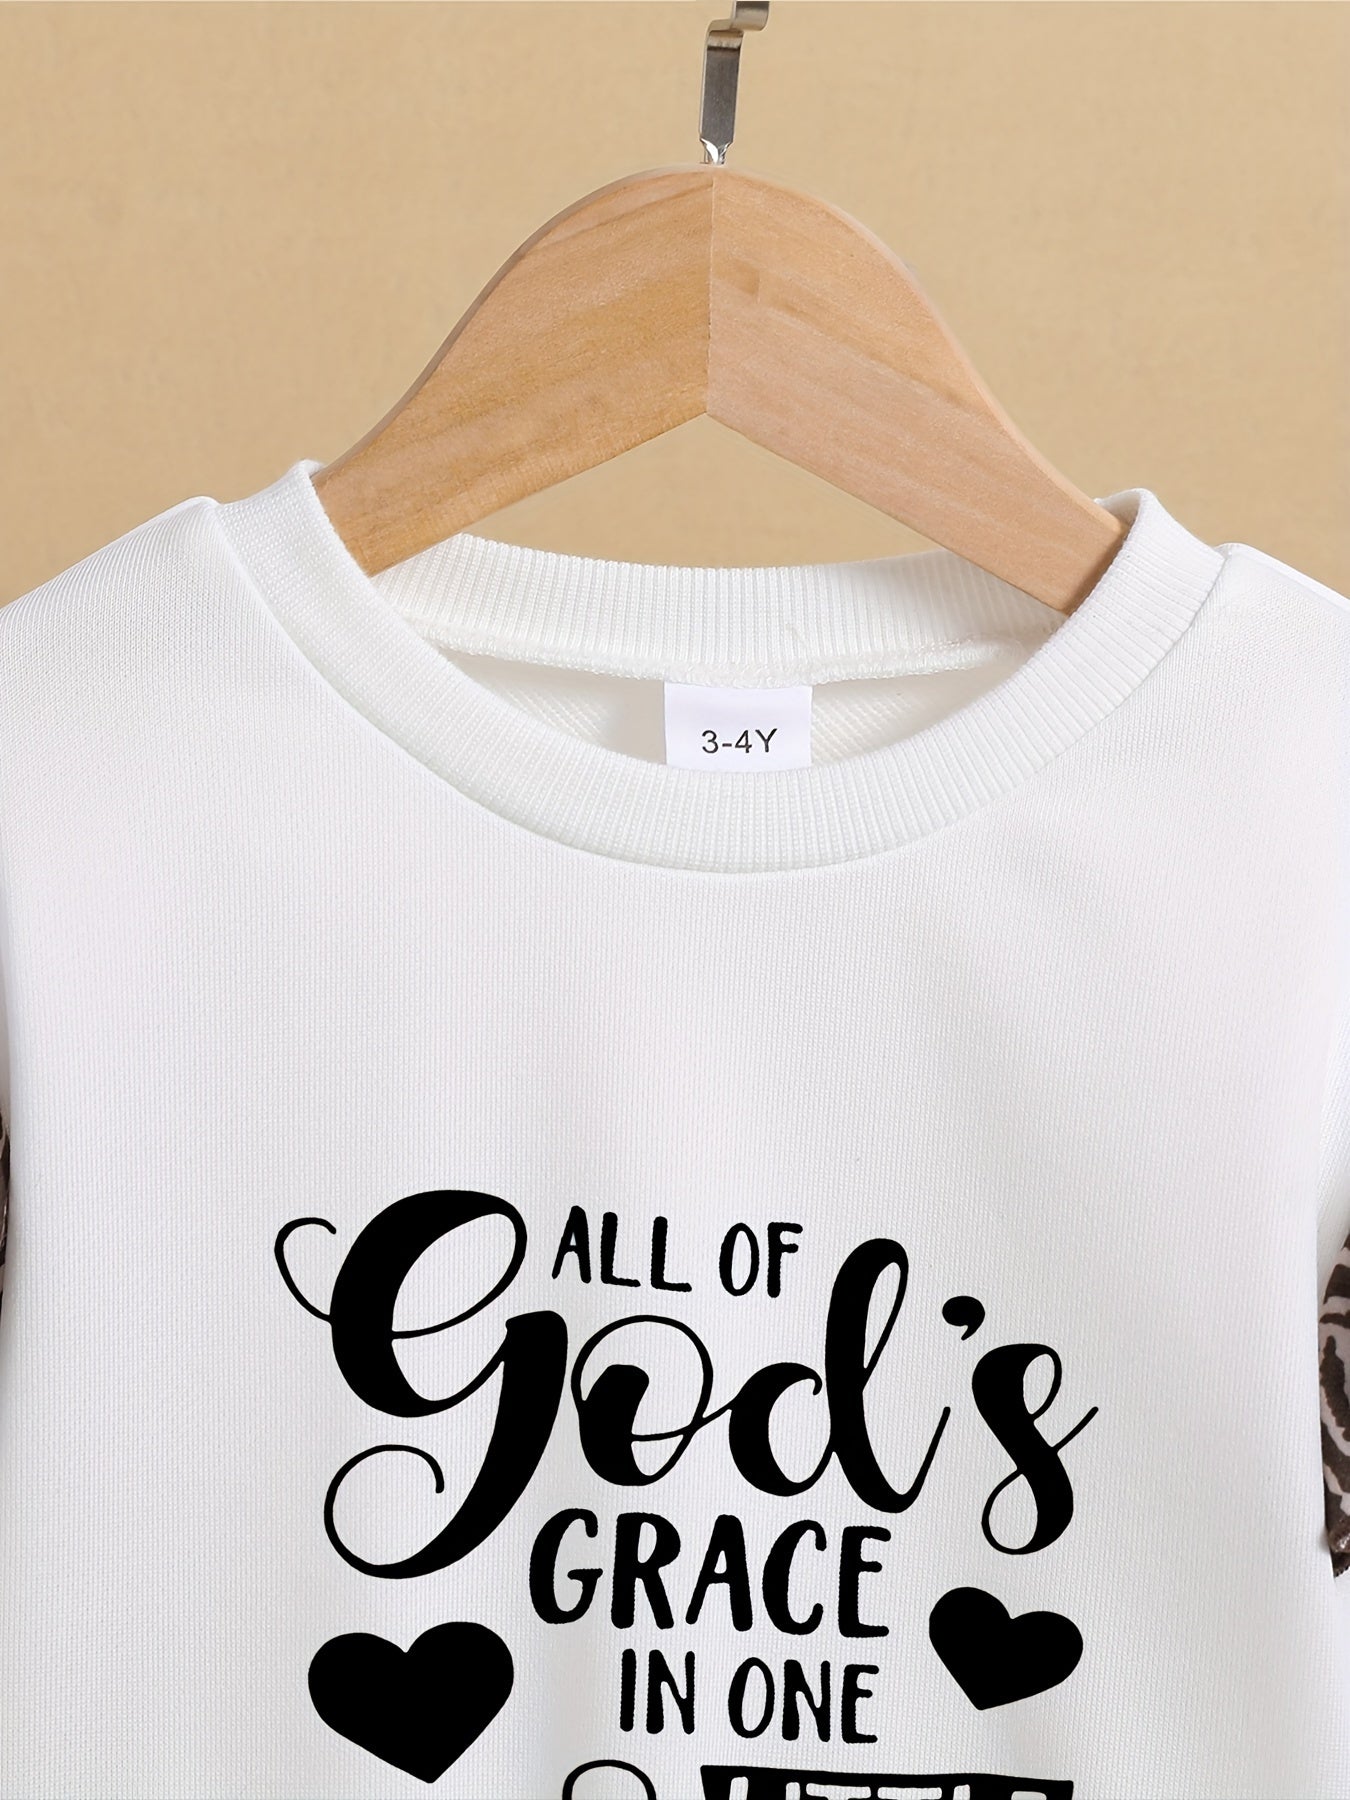 All Of God's Grace In One Little Face Youth Christian Pullover Sweatshirt claimedbygoddesigns